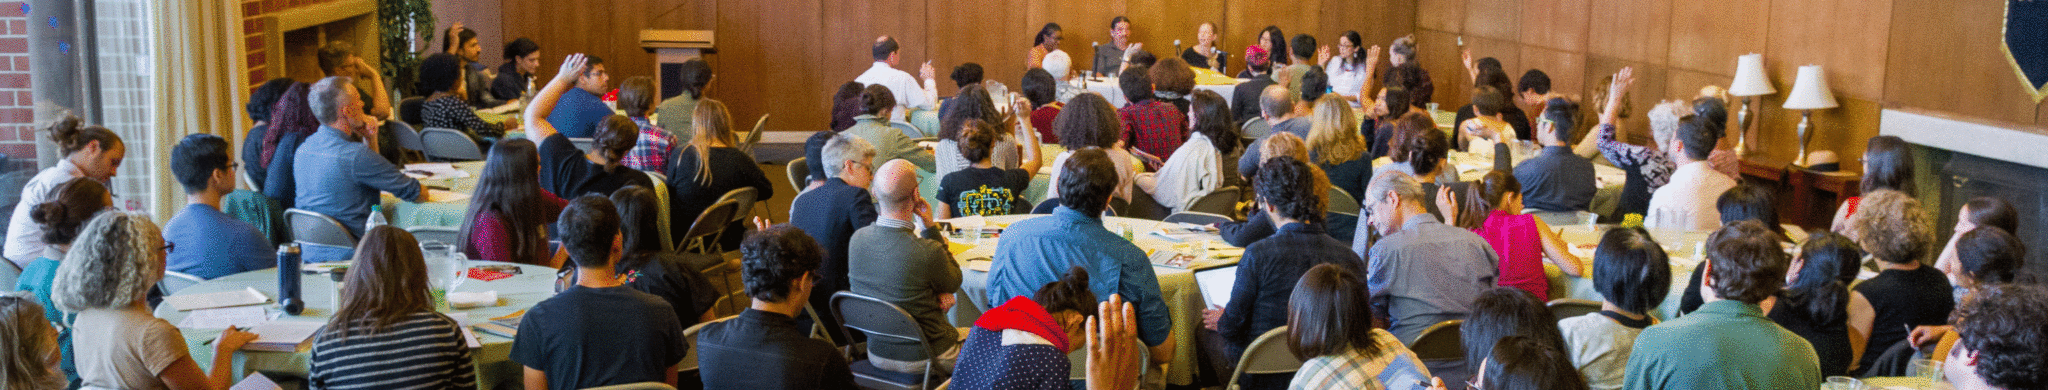 Audience members at Decolonizing Foodways Symposium 2015. Photo by: Jonathan Fong